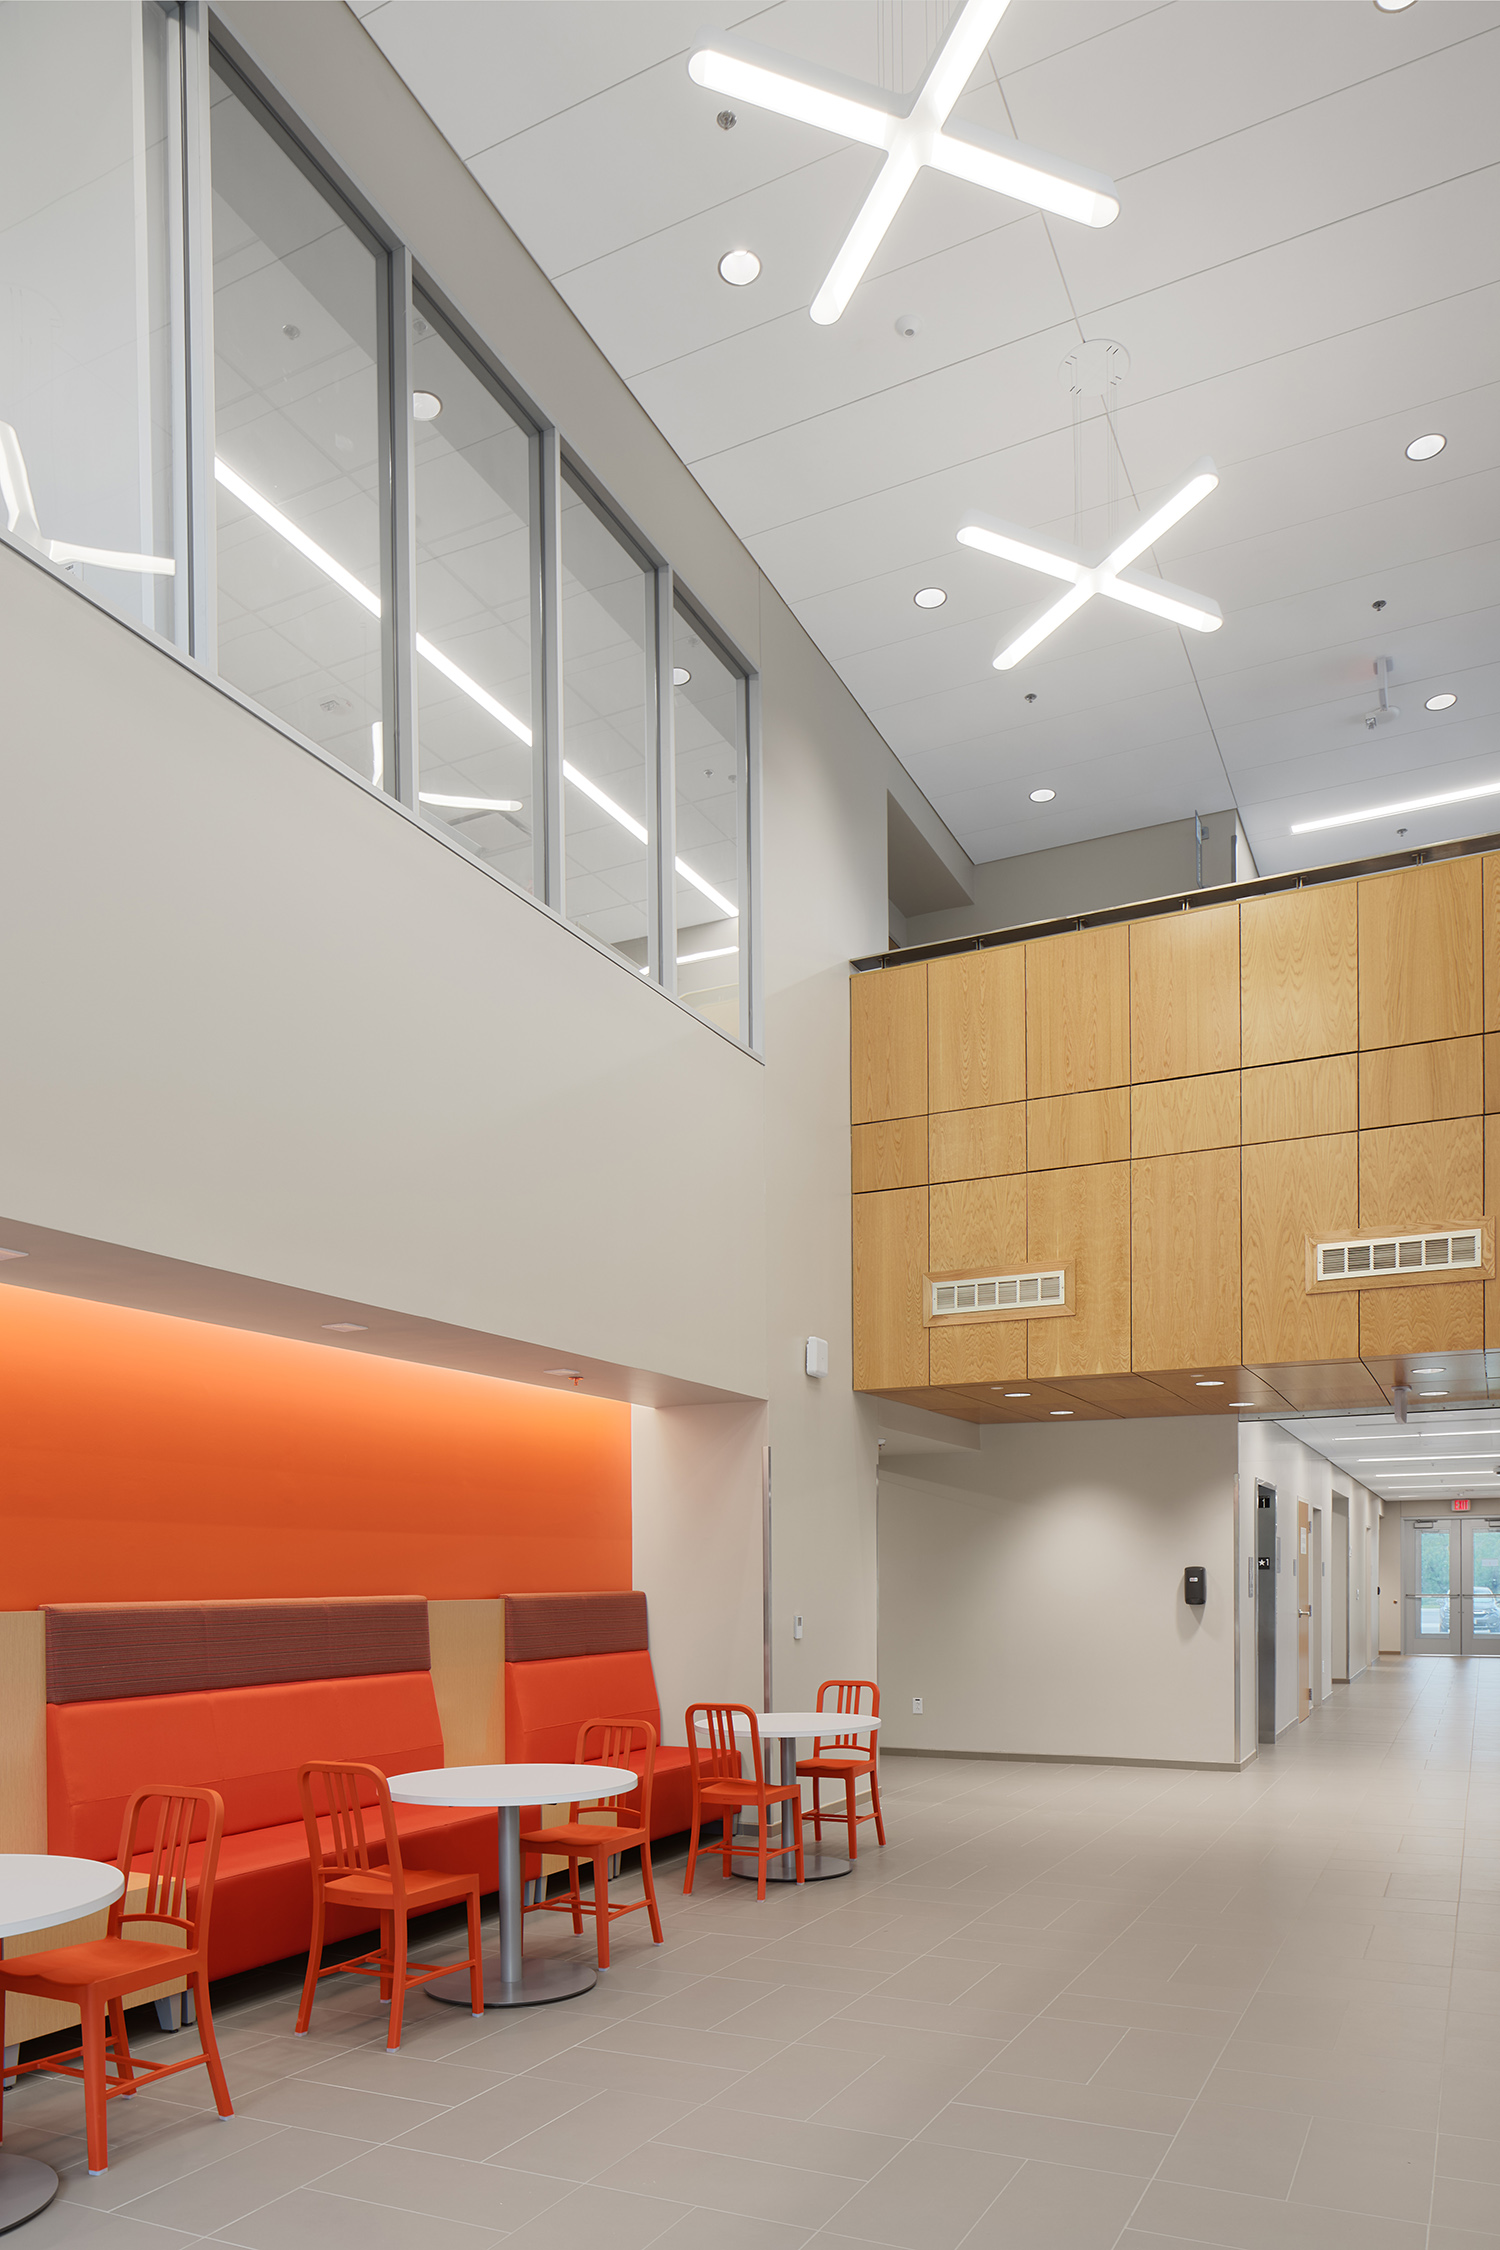 Team Based Learning Center – Alta Architects